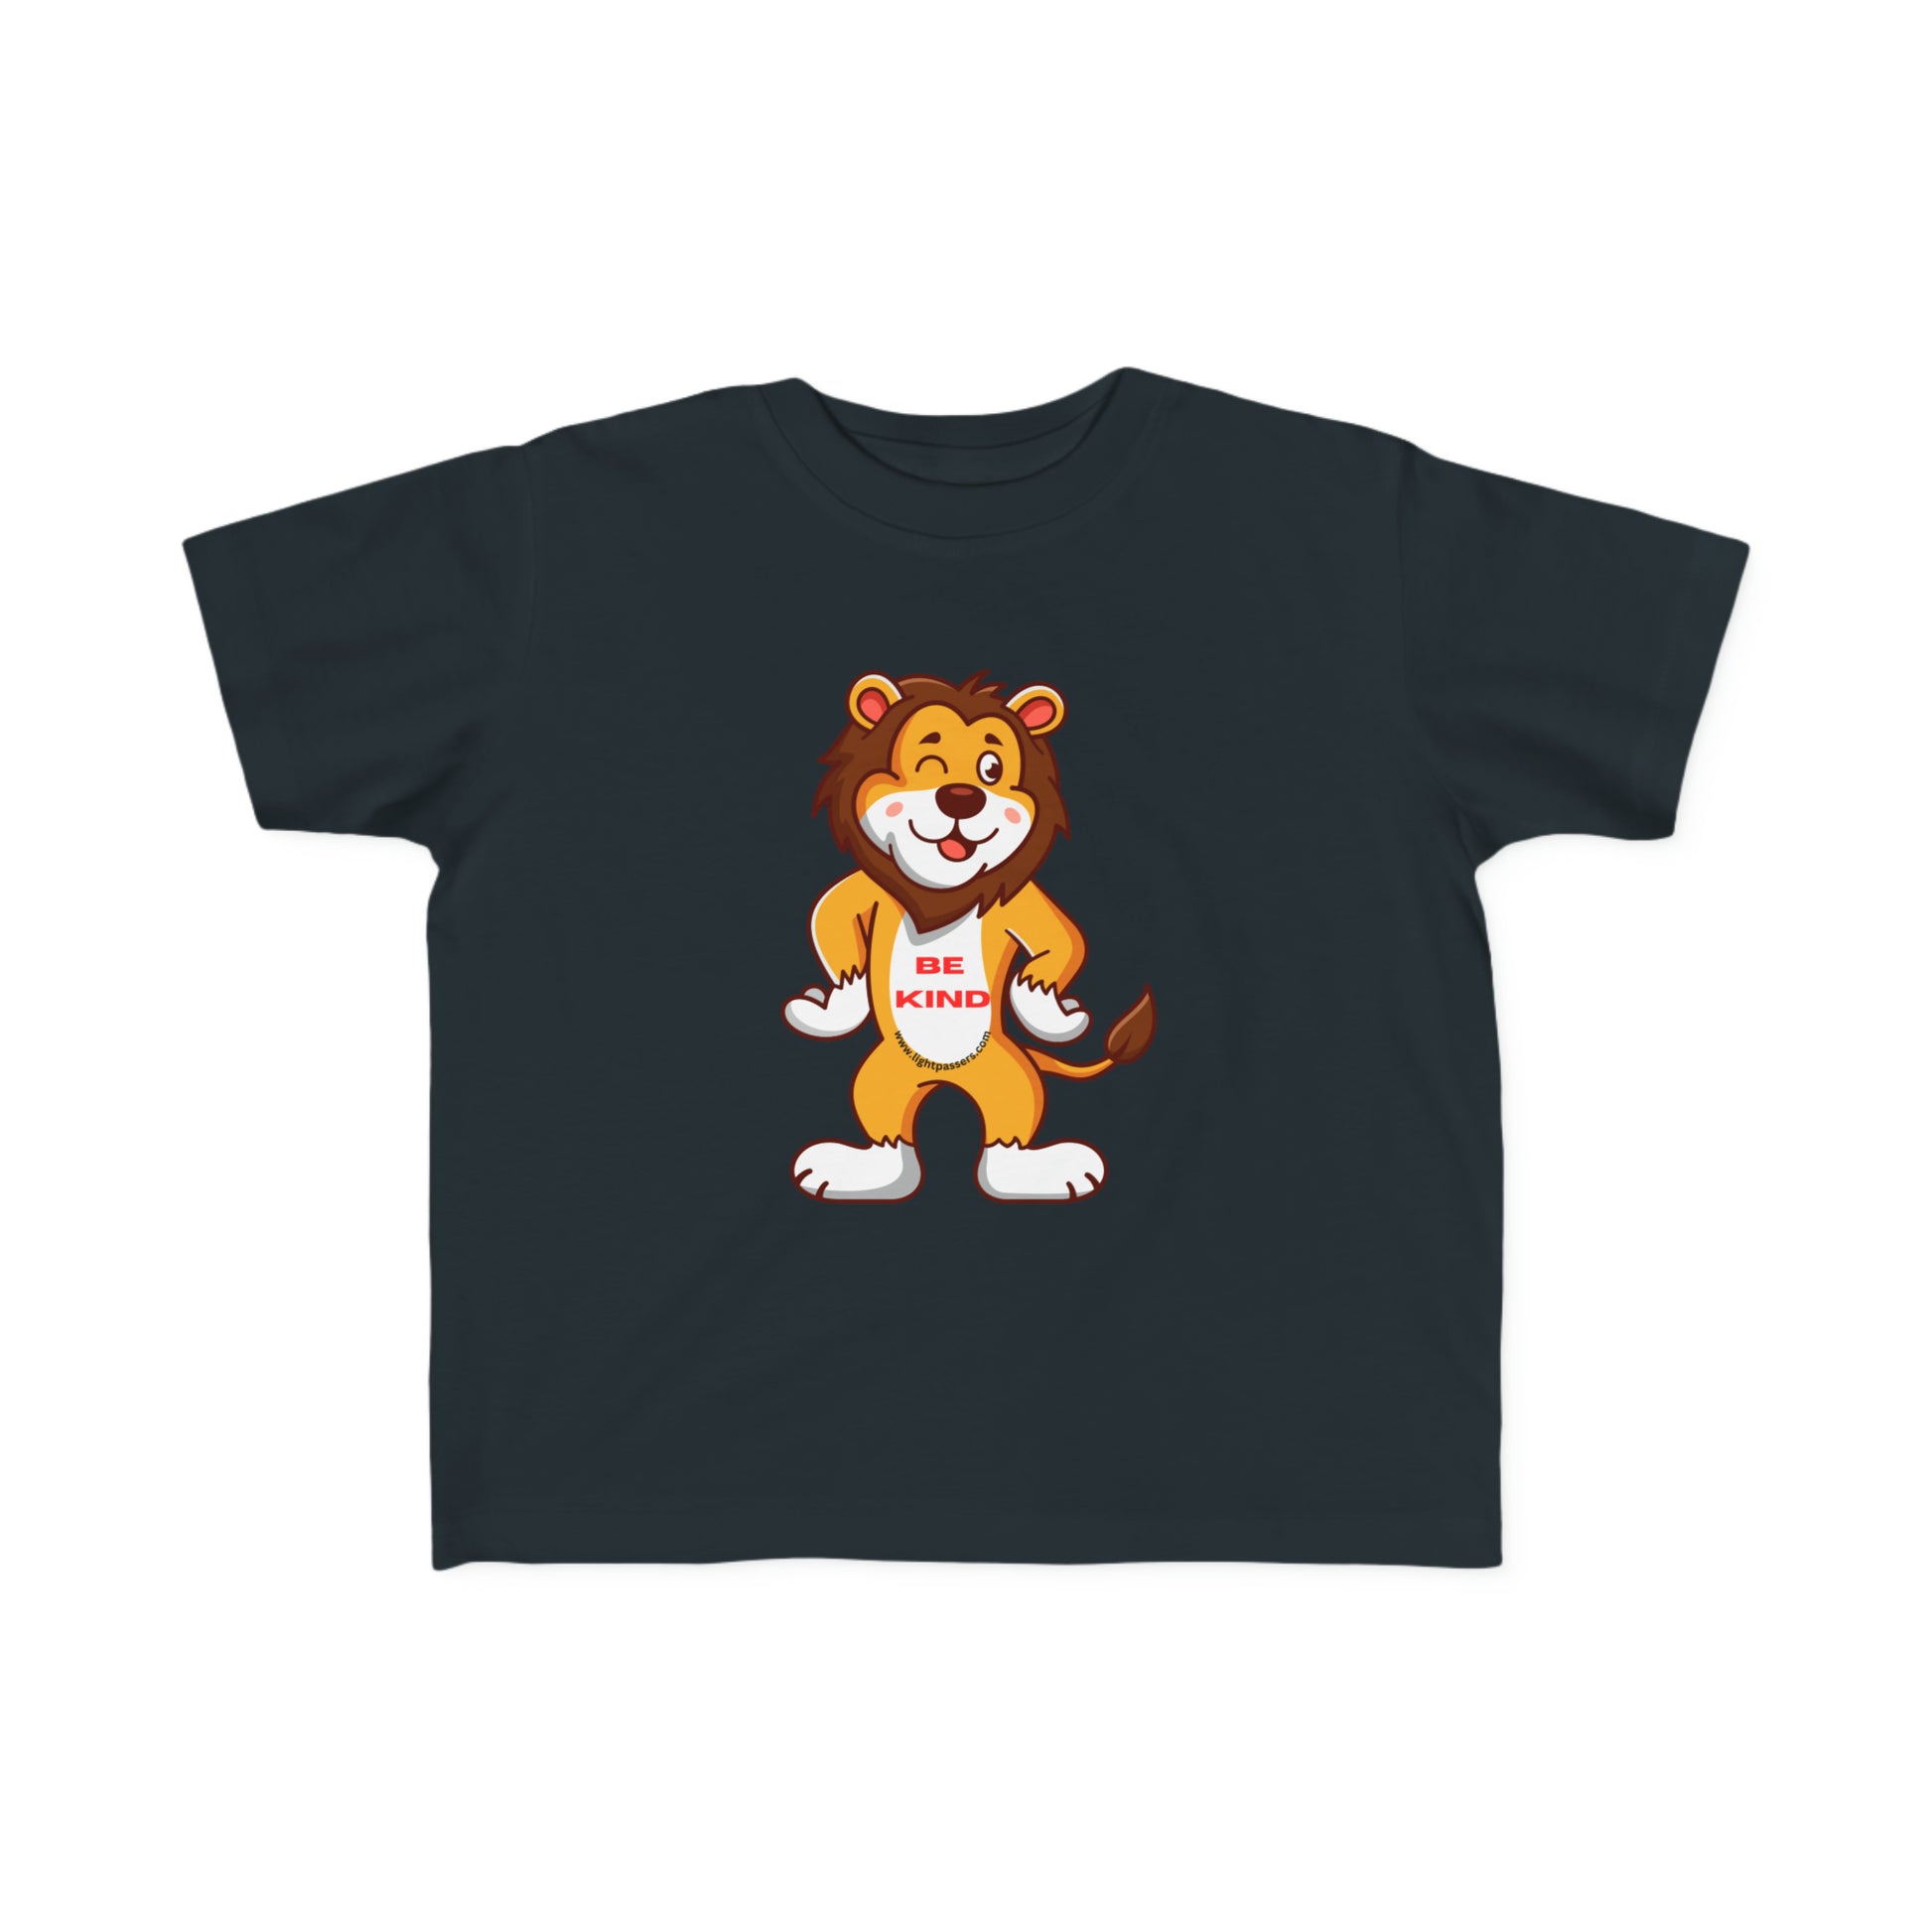 A toddler's tee featuring a cartoon lion design, soft 100% combed cotton, durable print, and tear-away label. Perfect for sensitive skin.